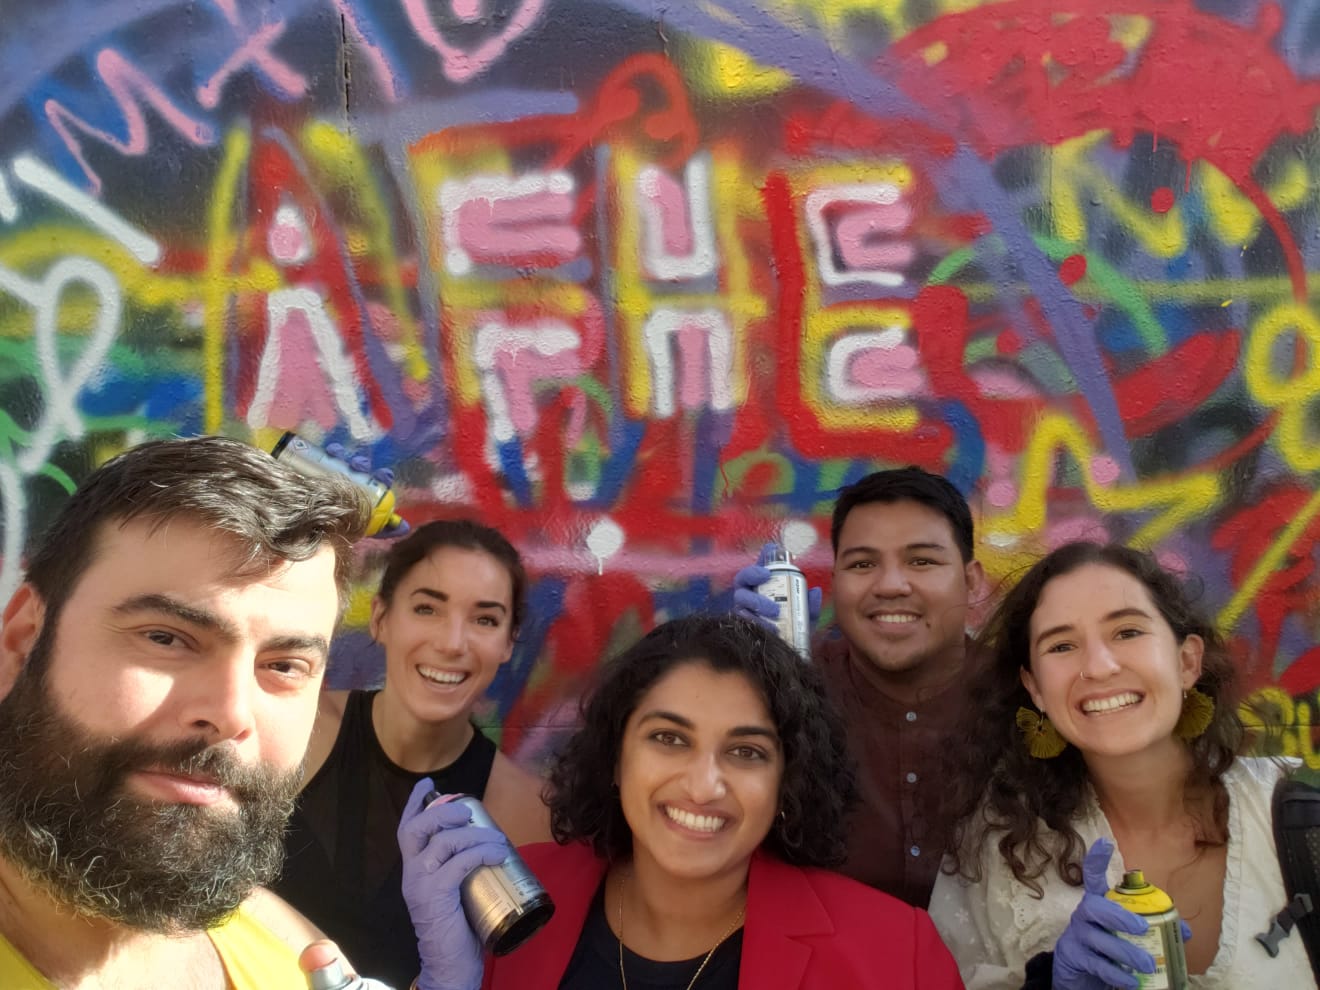 Group of people in front of a painted wall.